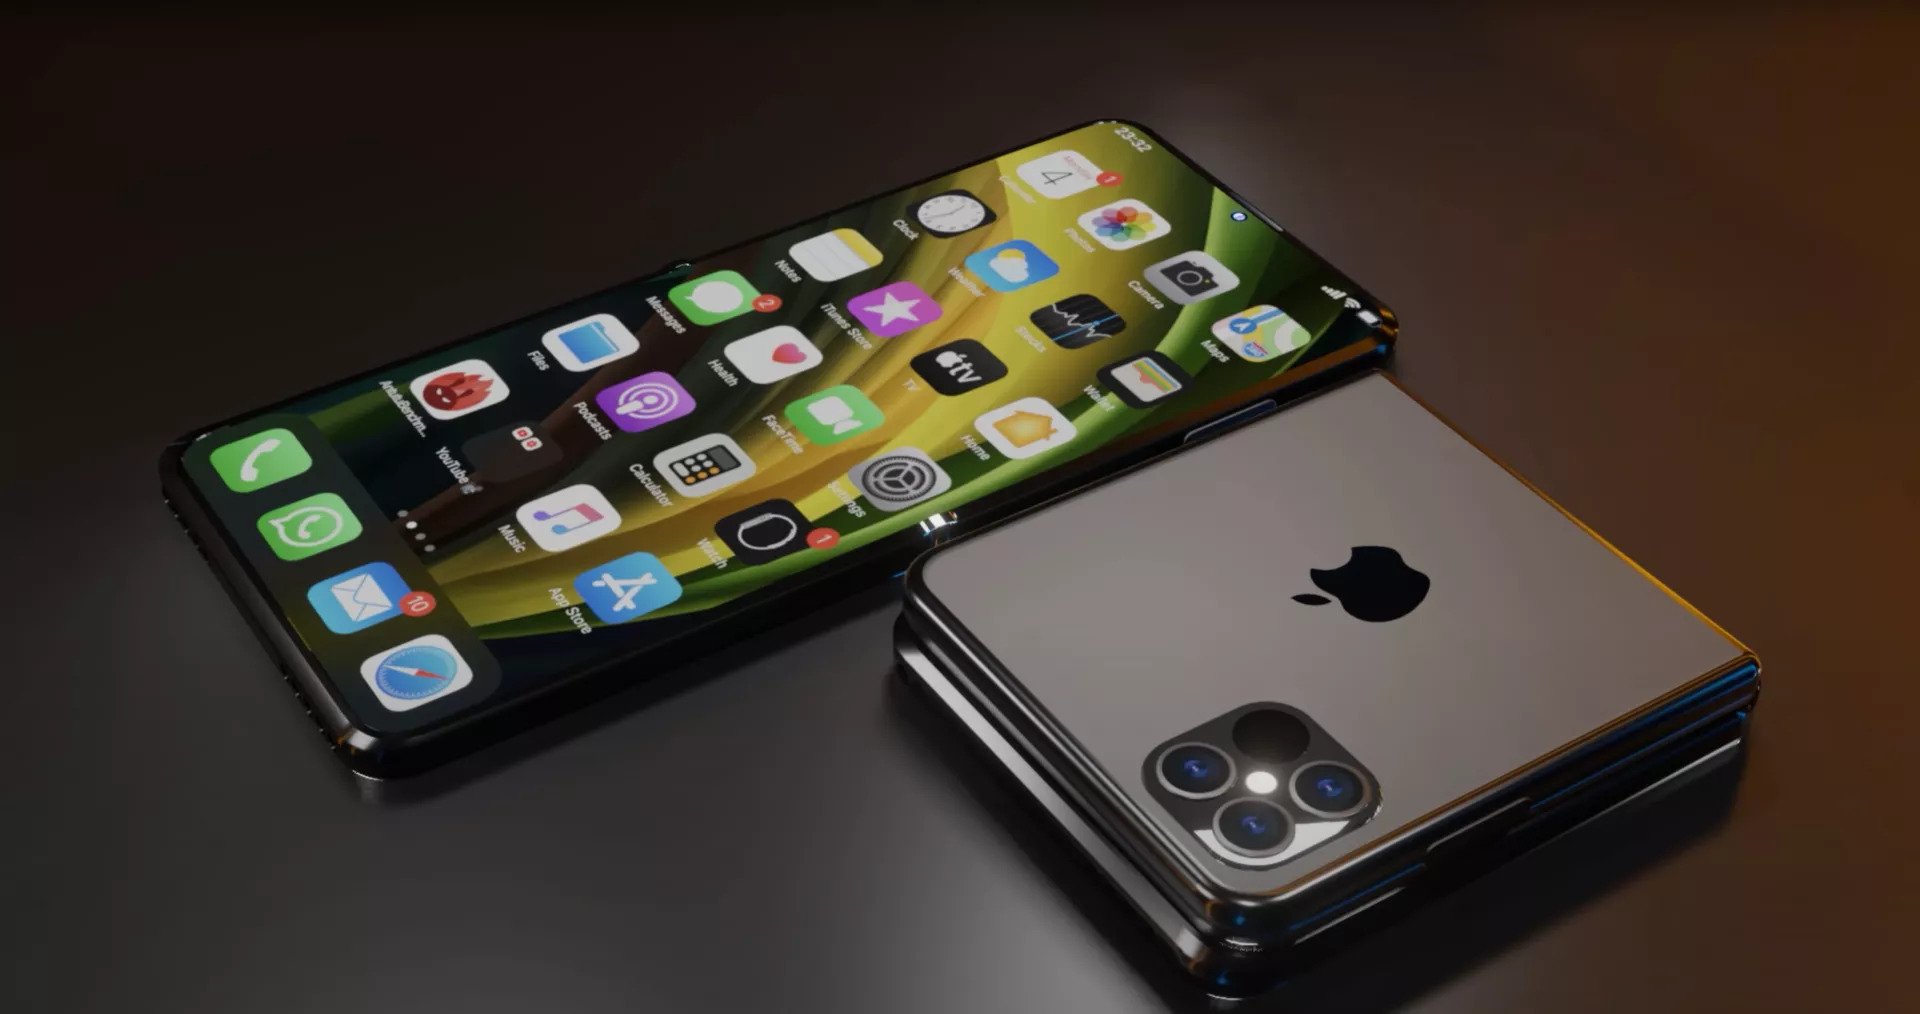 Folding iPhone concept from iOS Beta News.